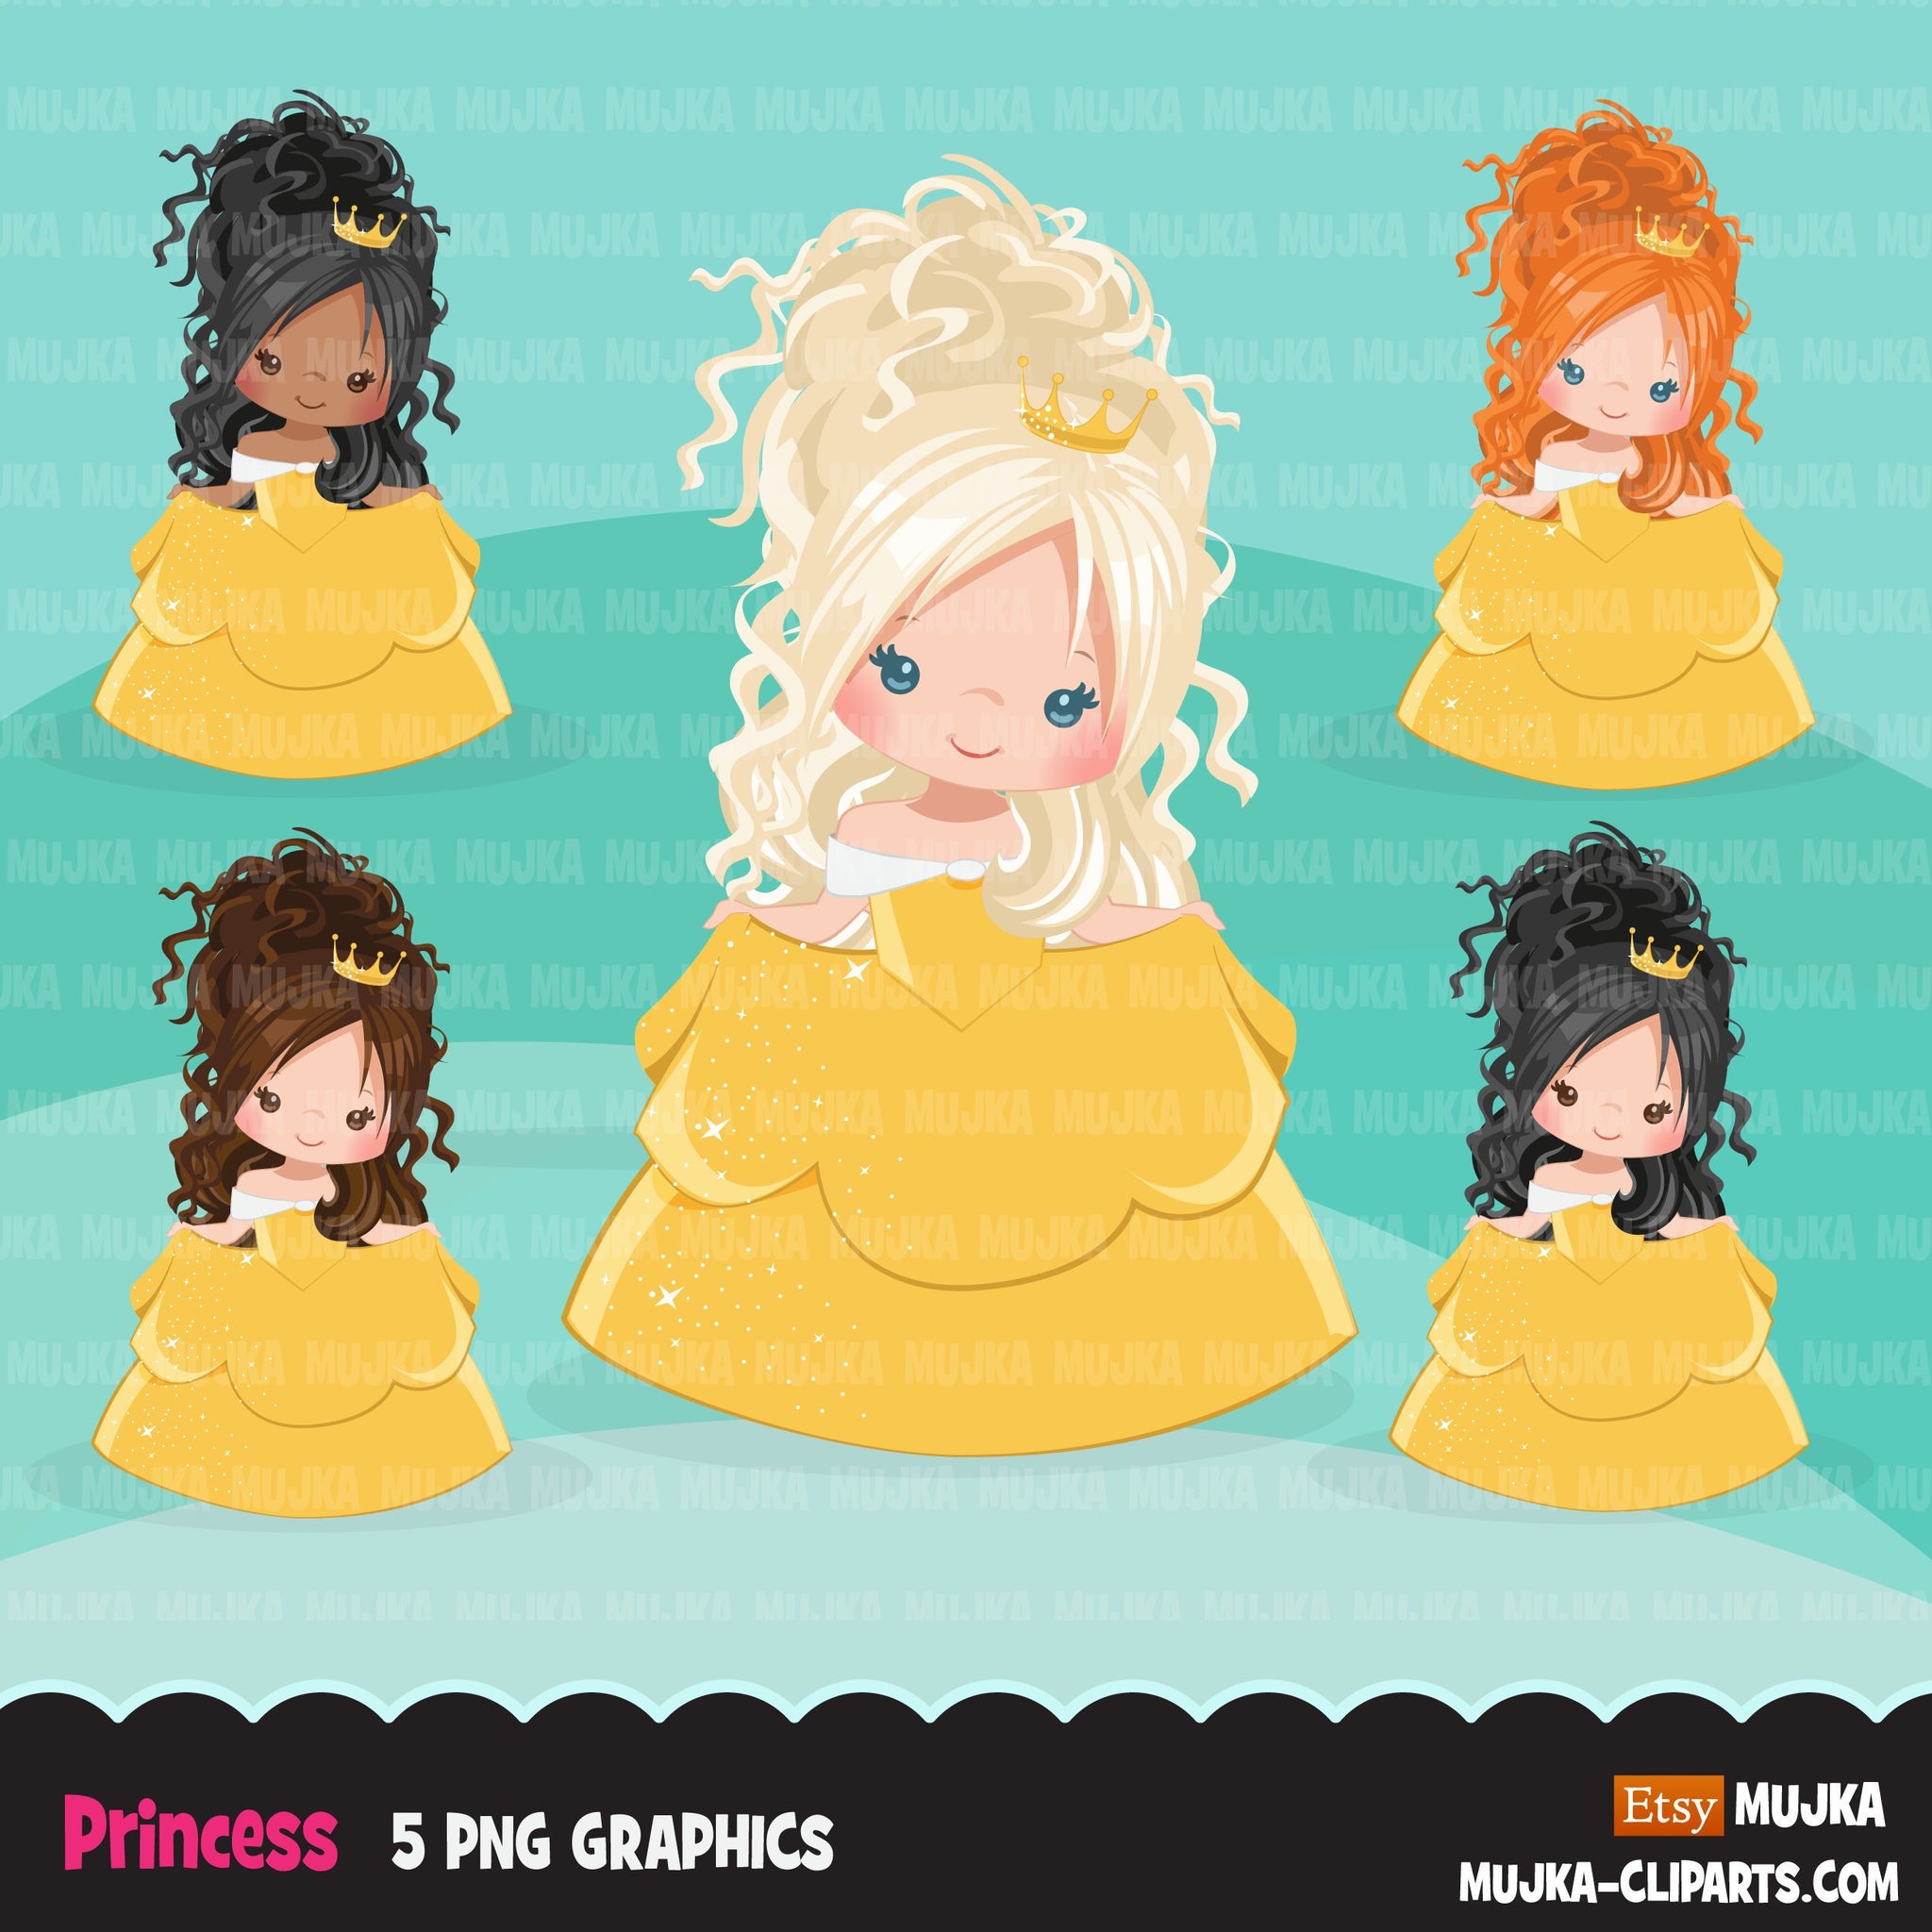 Princess clipart, fairy tale graphics, girls story book, yellow princess dress, commercial use clip art